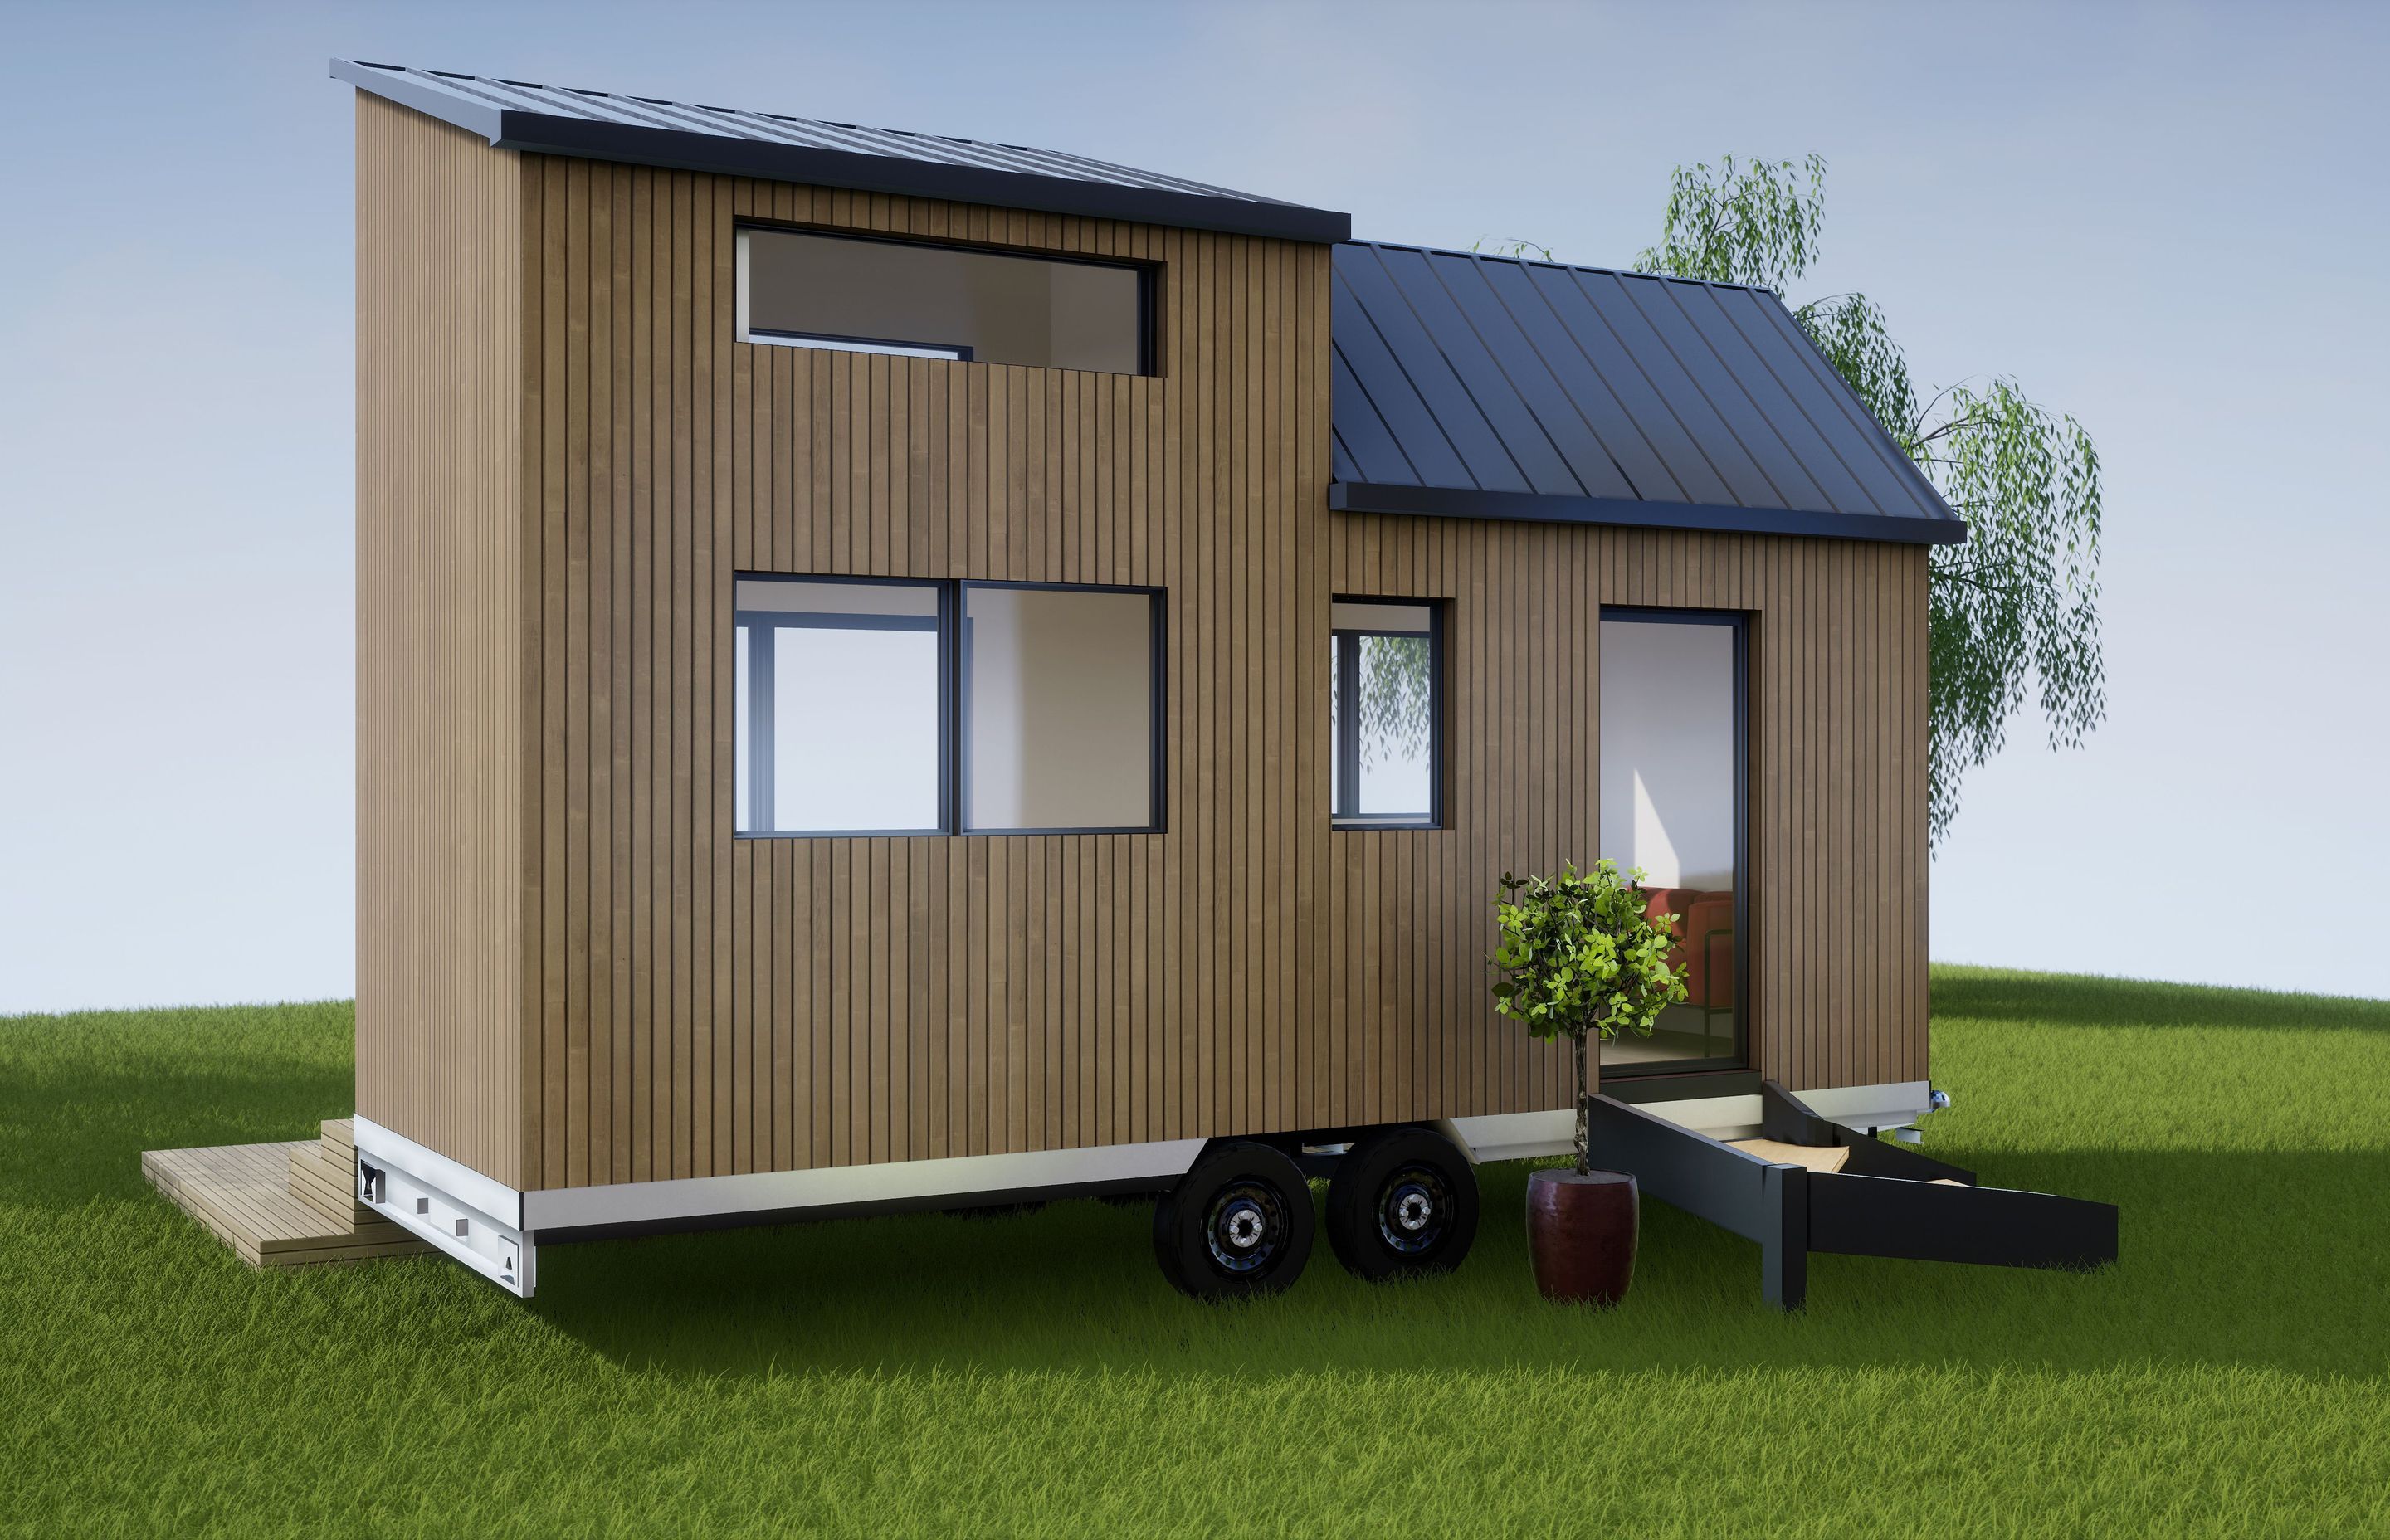 The Tiny House Guide - Dimensions, Regulations and More